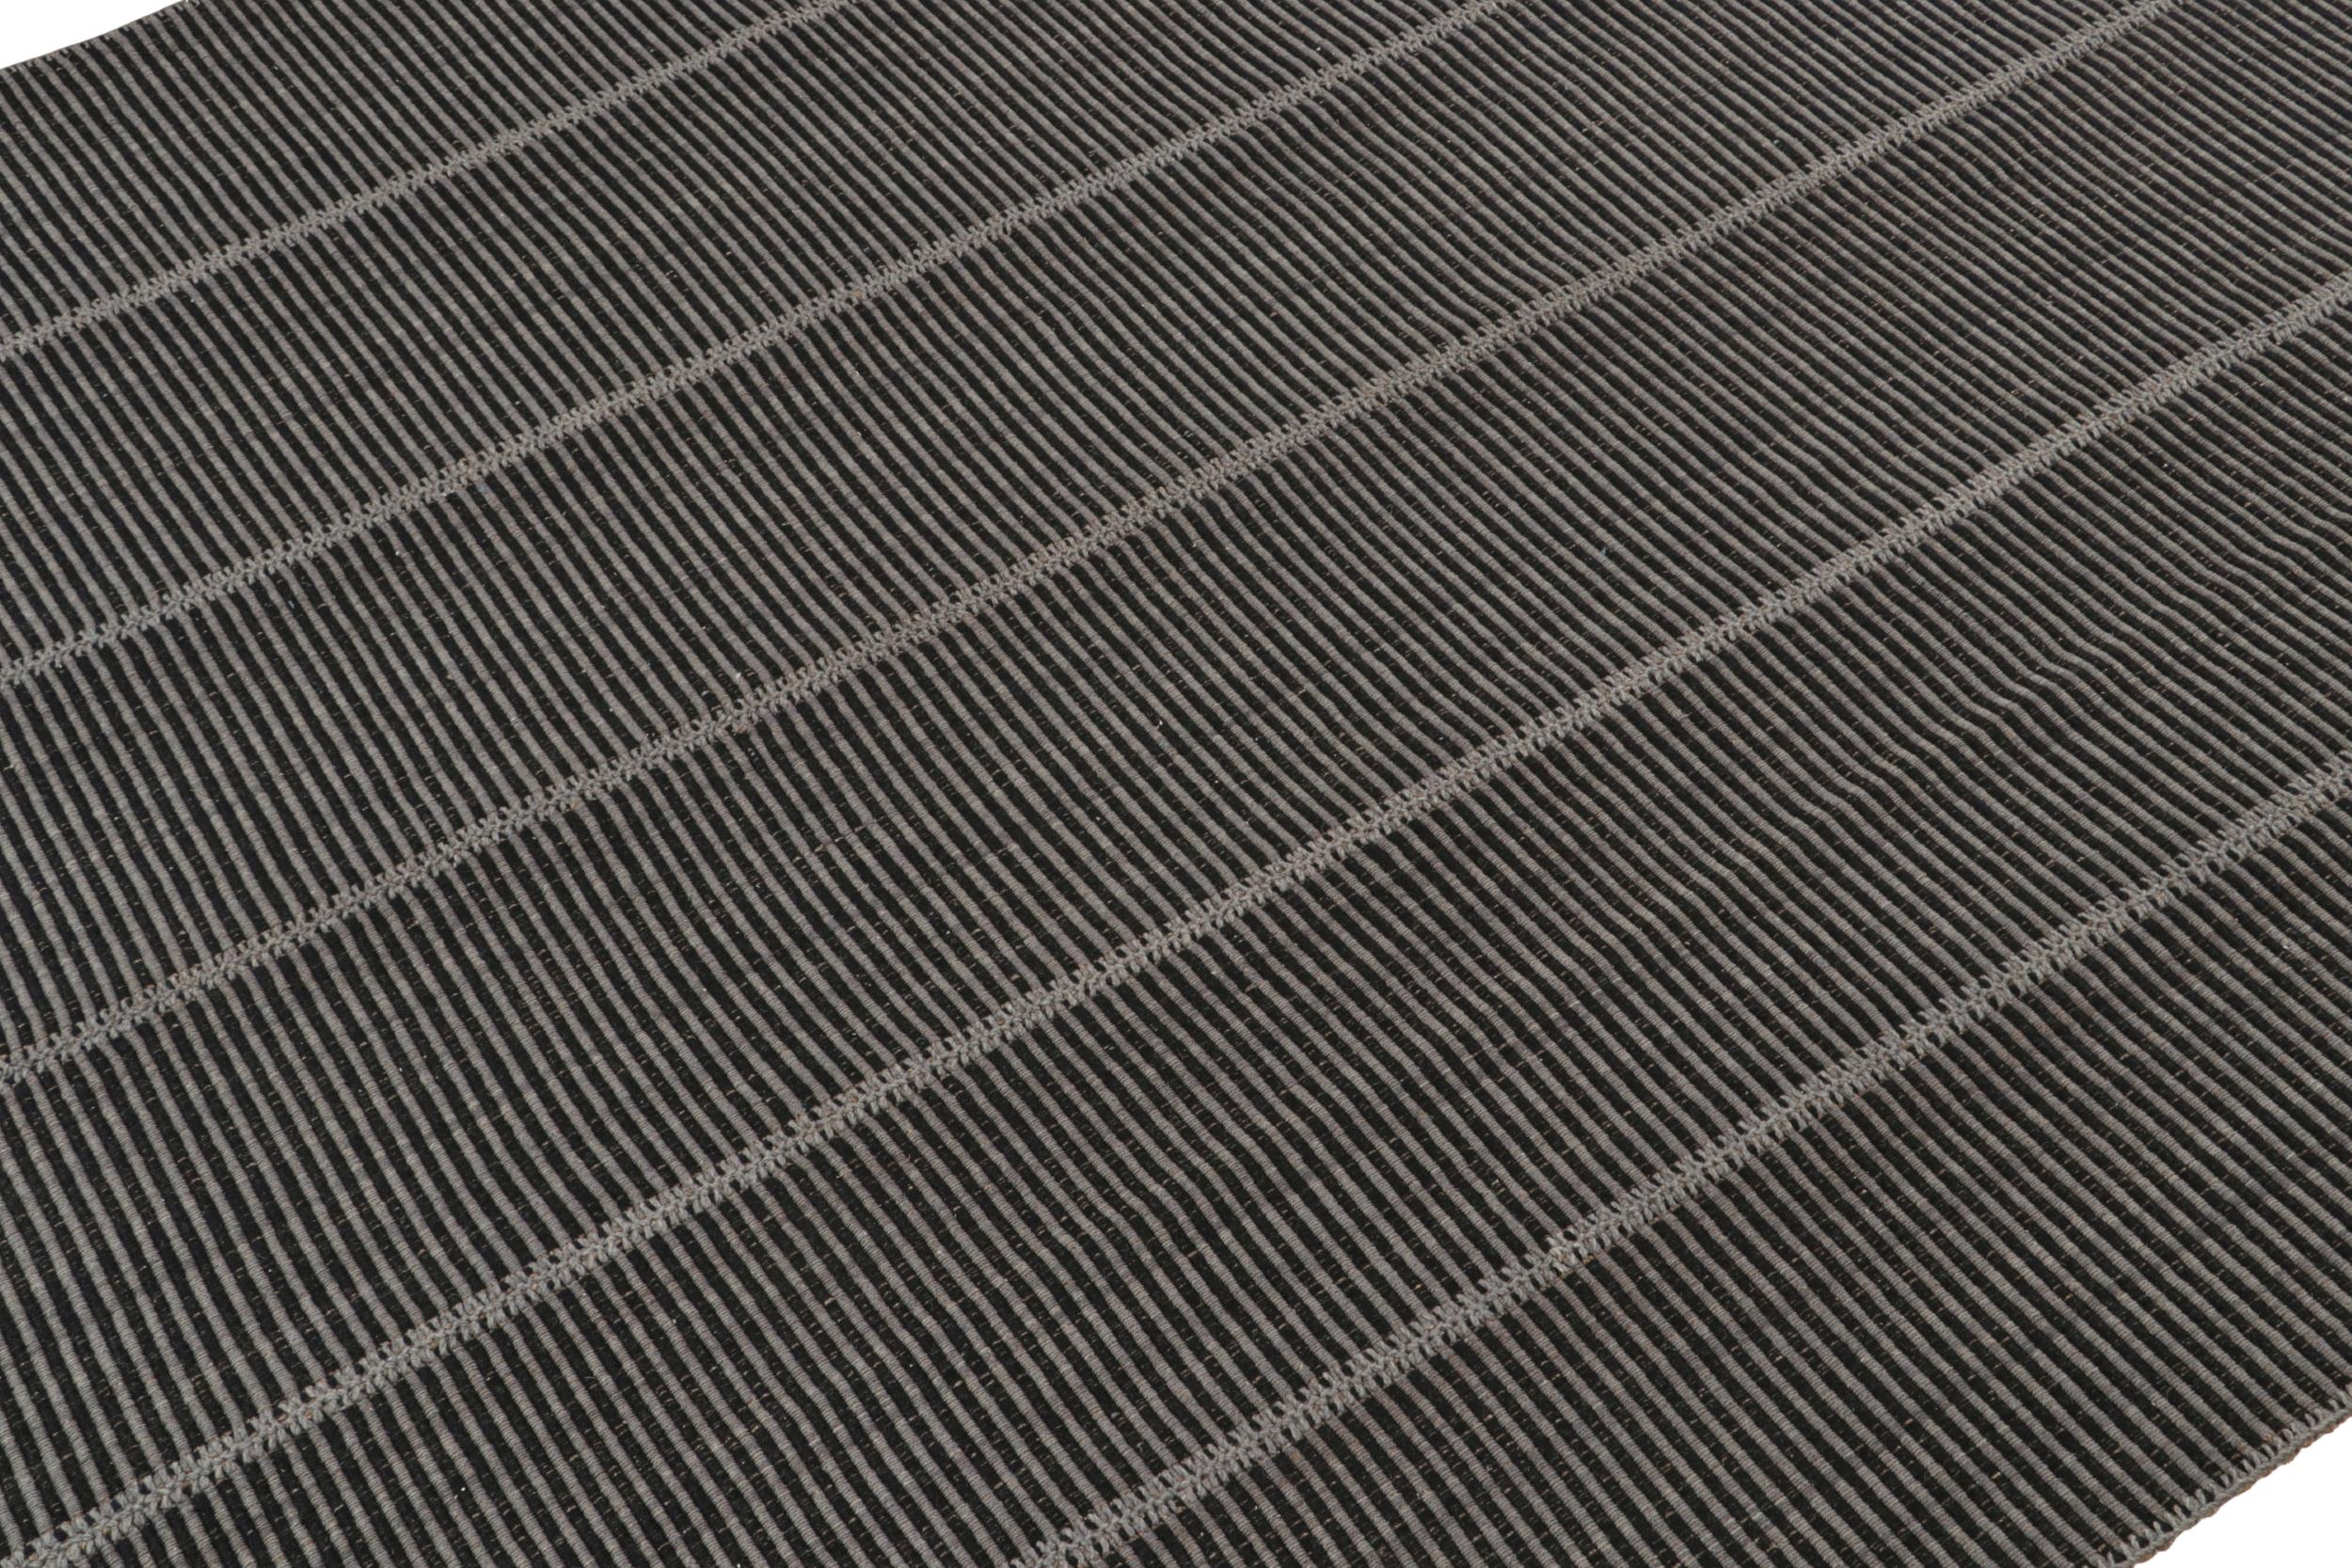 Handwoven in wool, a 10x14 Kilim from a bold new line of contemporary flatweaves by Rug & Kilim.

On the Design: 

Connoting a modern take on classic panel-weaving, our latest “Rez Kilim” enjoys black & Gray tones. Keen eyes will admire how this